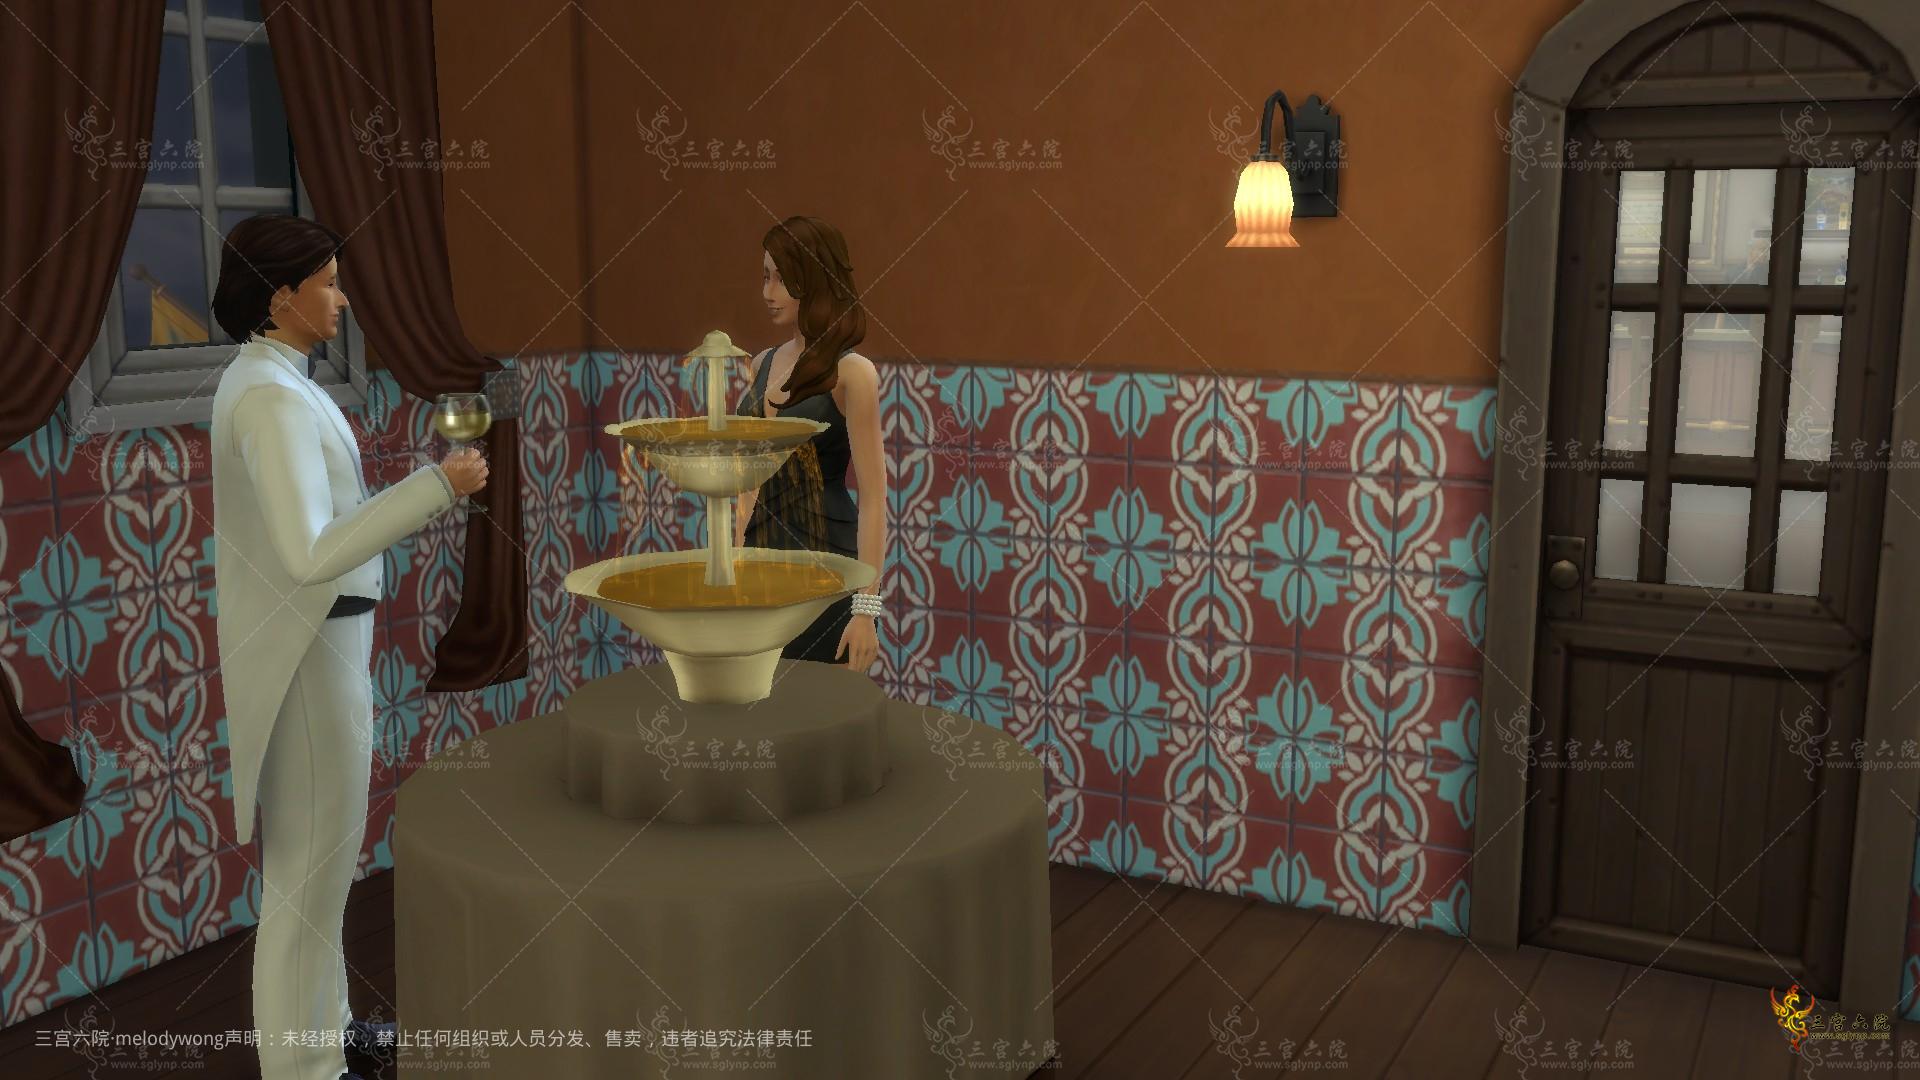 The Sims 4 2021_8_17  01_09_03.png